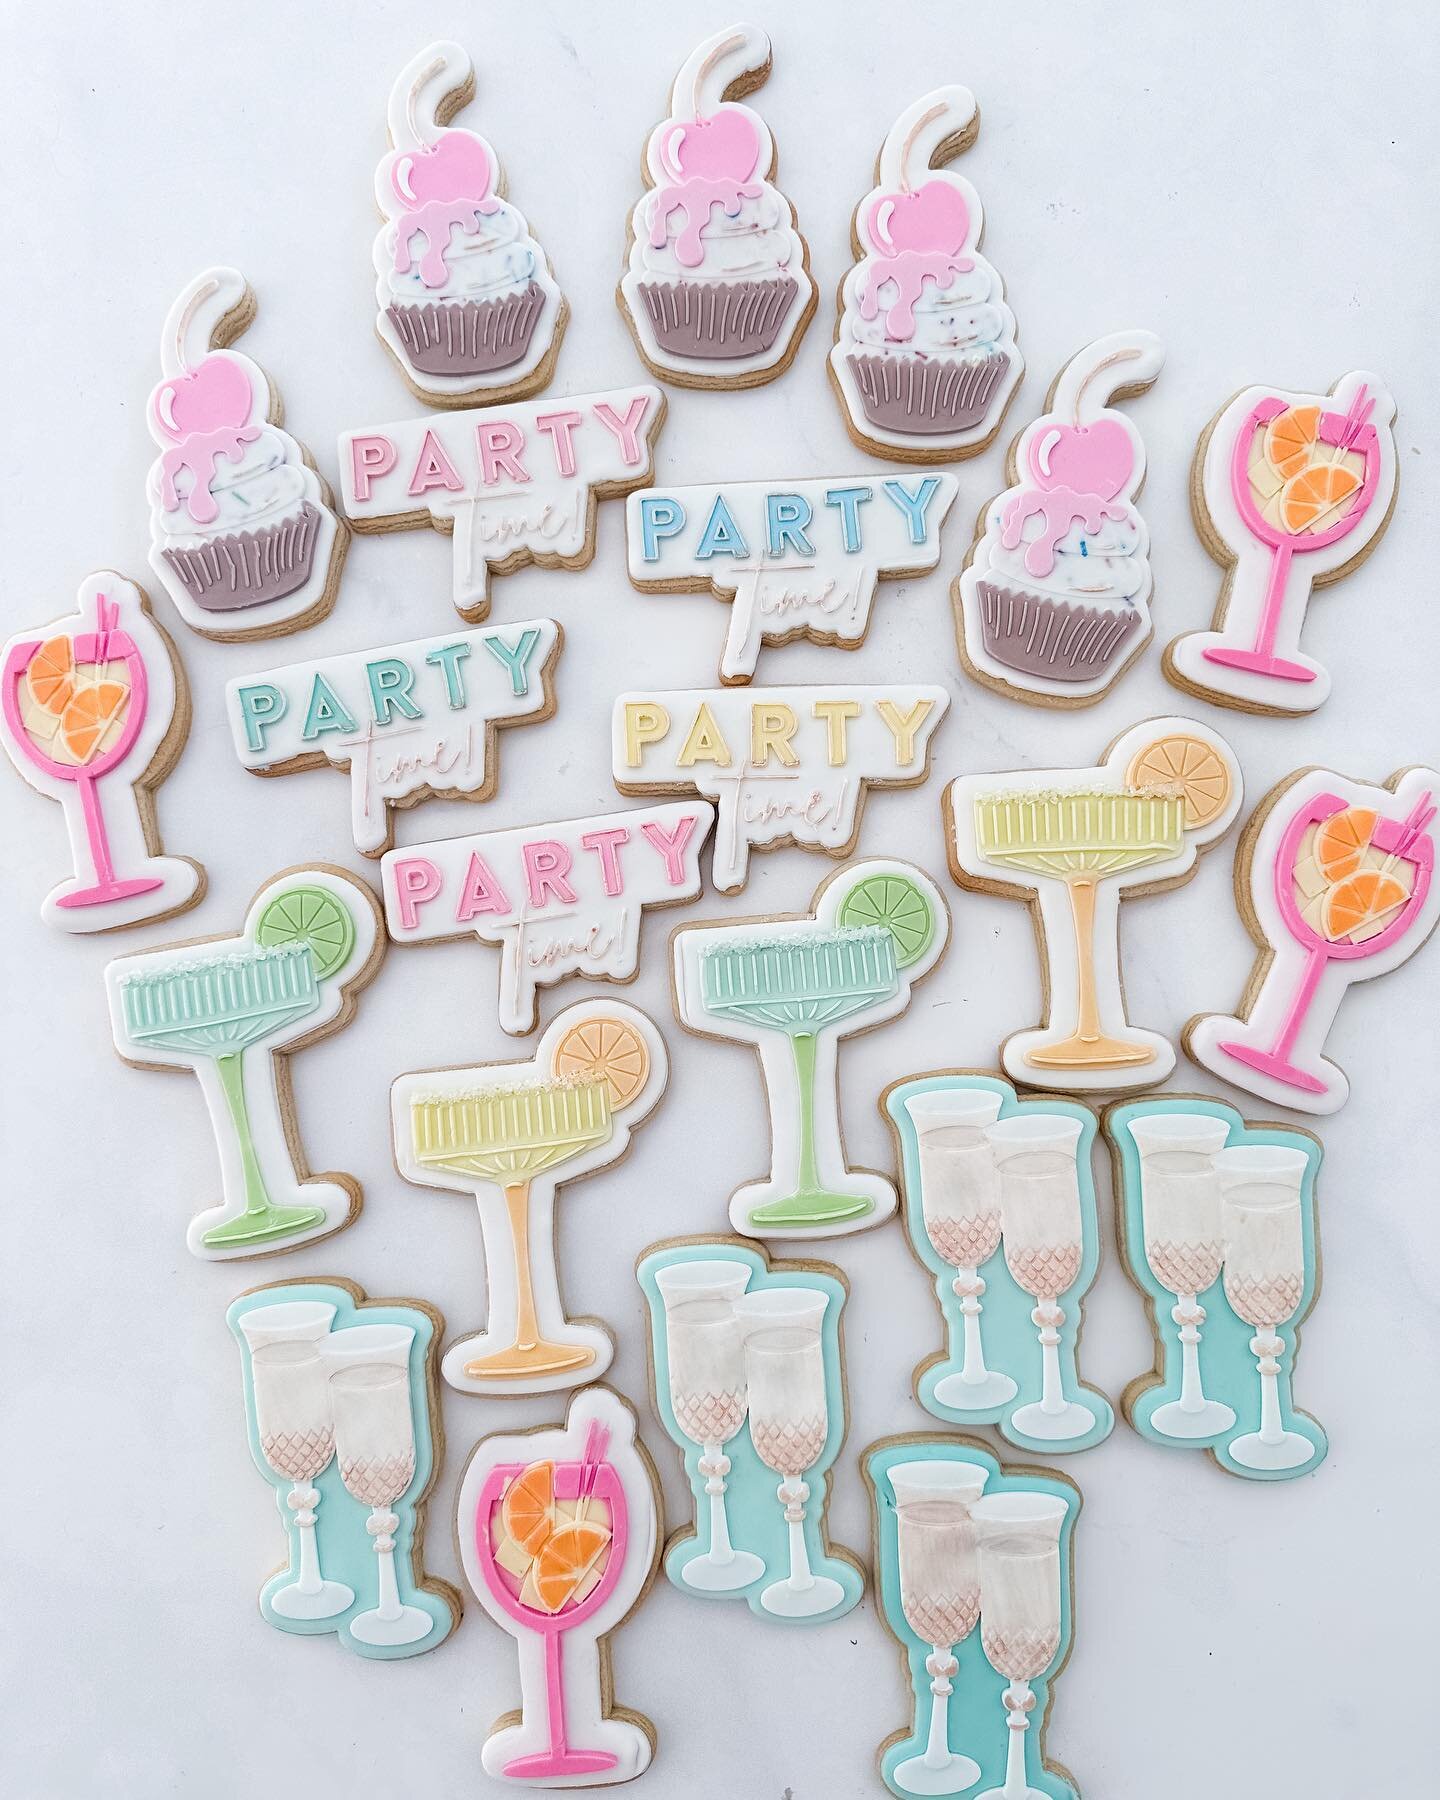 IT&rsquo;S PARTY TIME!! All of my favorite cocktails along with funfetti fondant cupcakes with a cherry on top, It&rsquo;s my party and I&rsquo;ll eat cookies if I want to! #brisbanecookies #therippedbaker #newsteadcookies #cocktailcookies #brisbanef